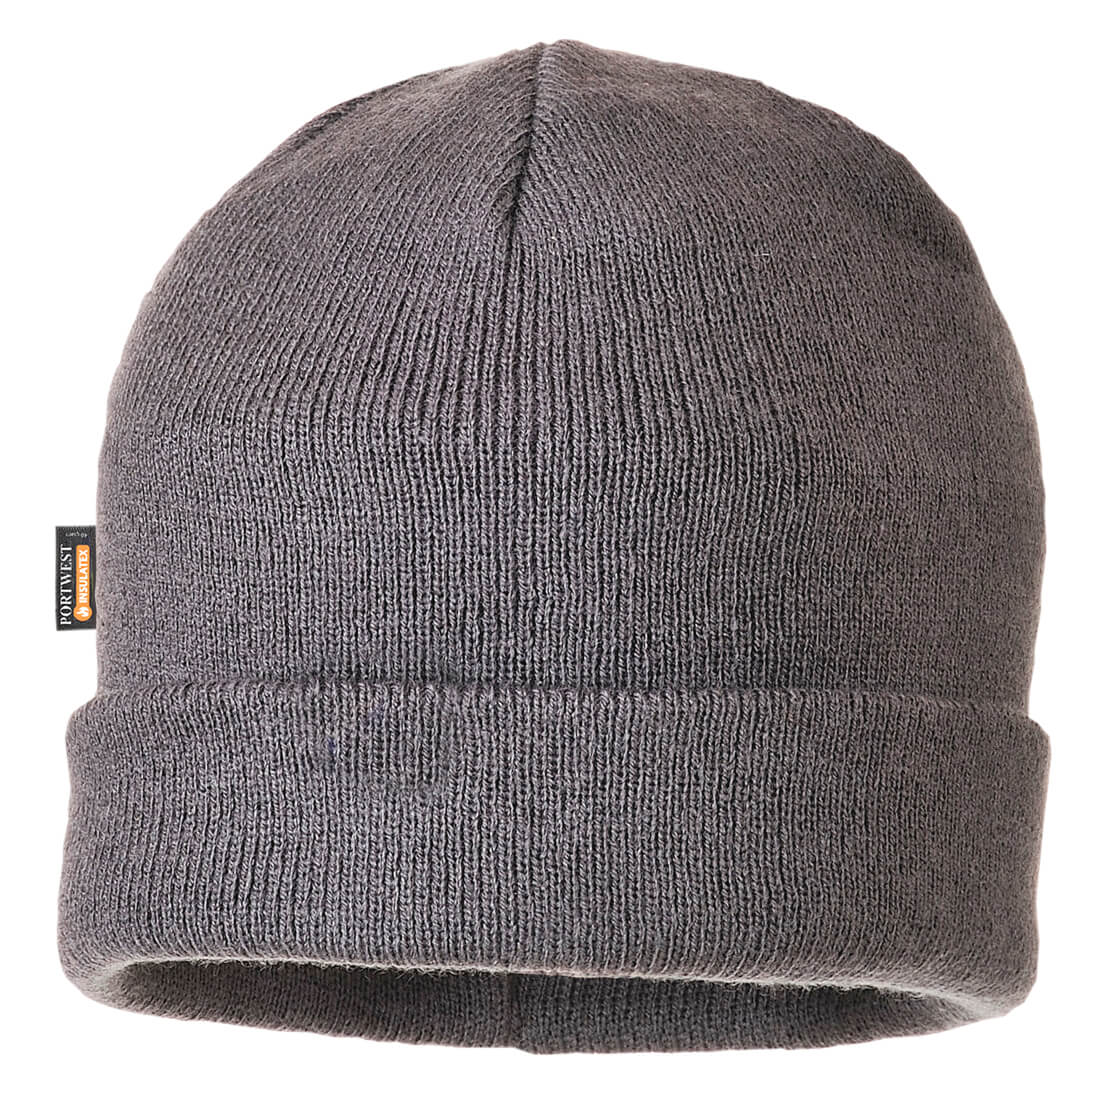 Knit Cap Insulatex Lined Size  Grey